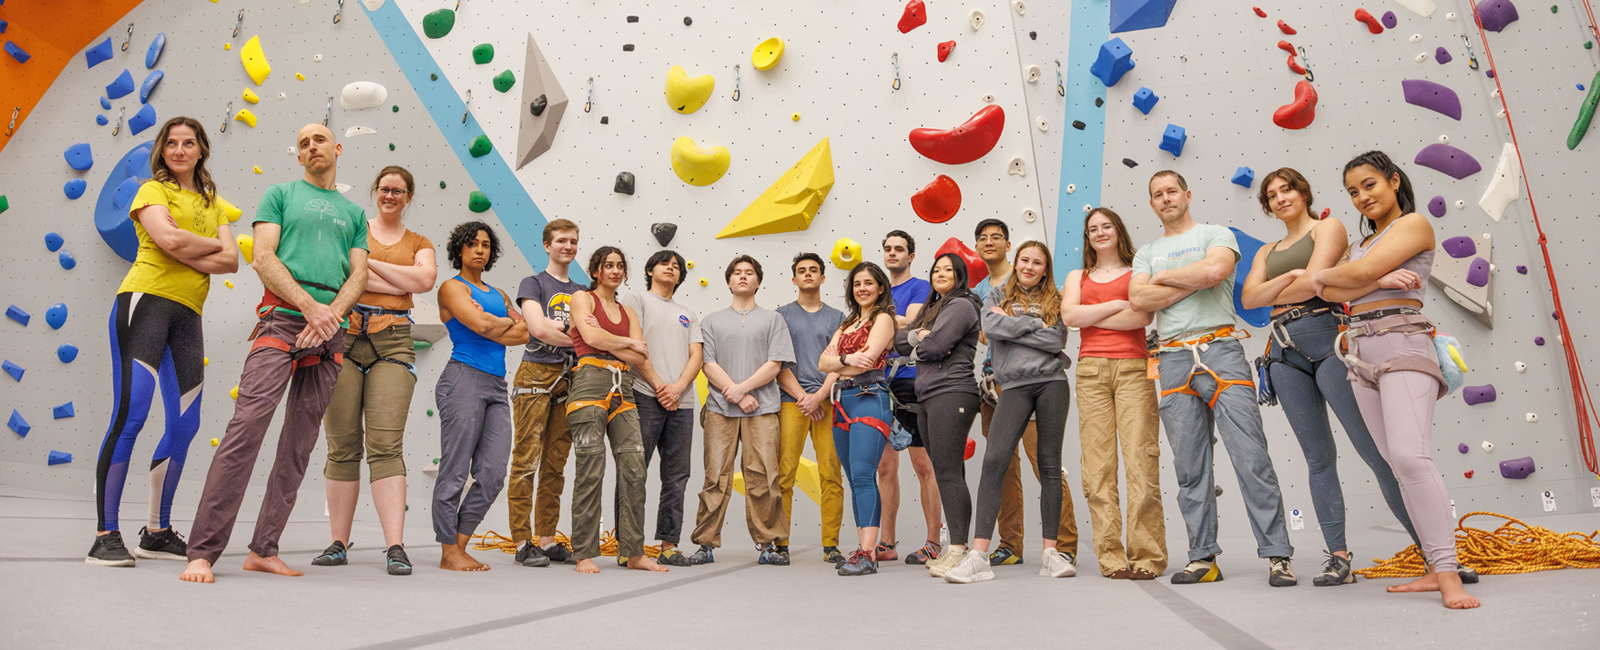 group of people posing in front of a climbing wall